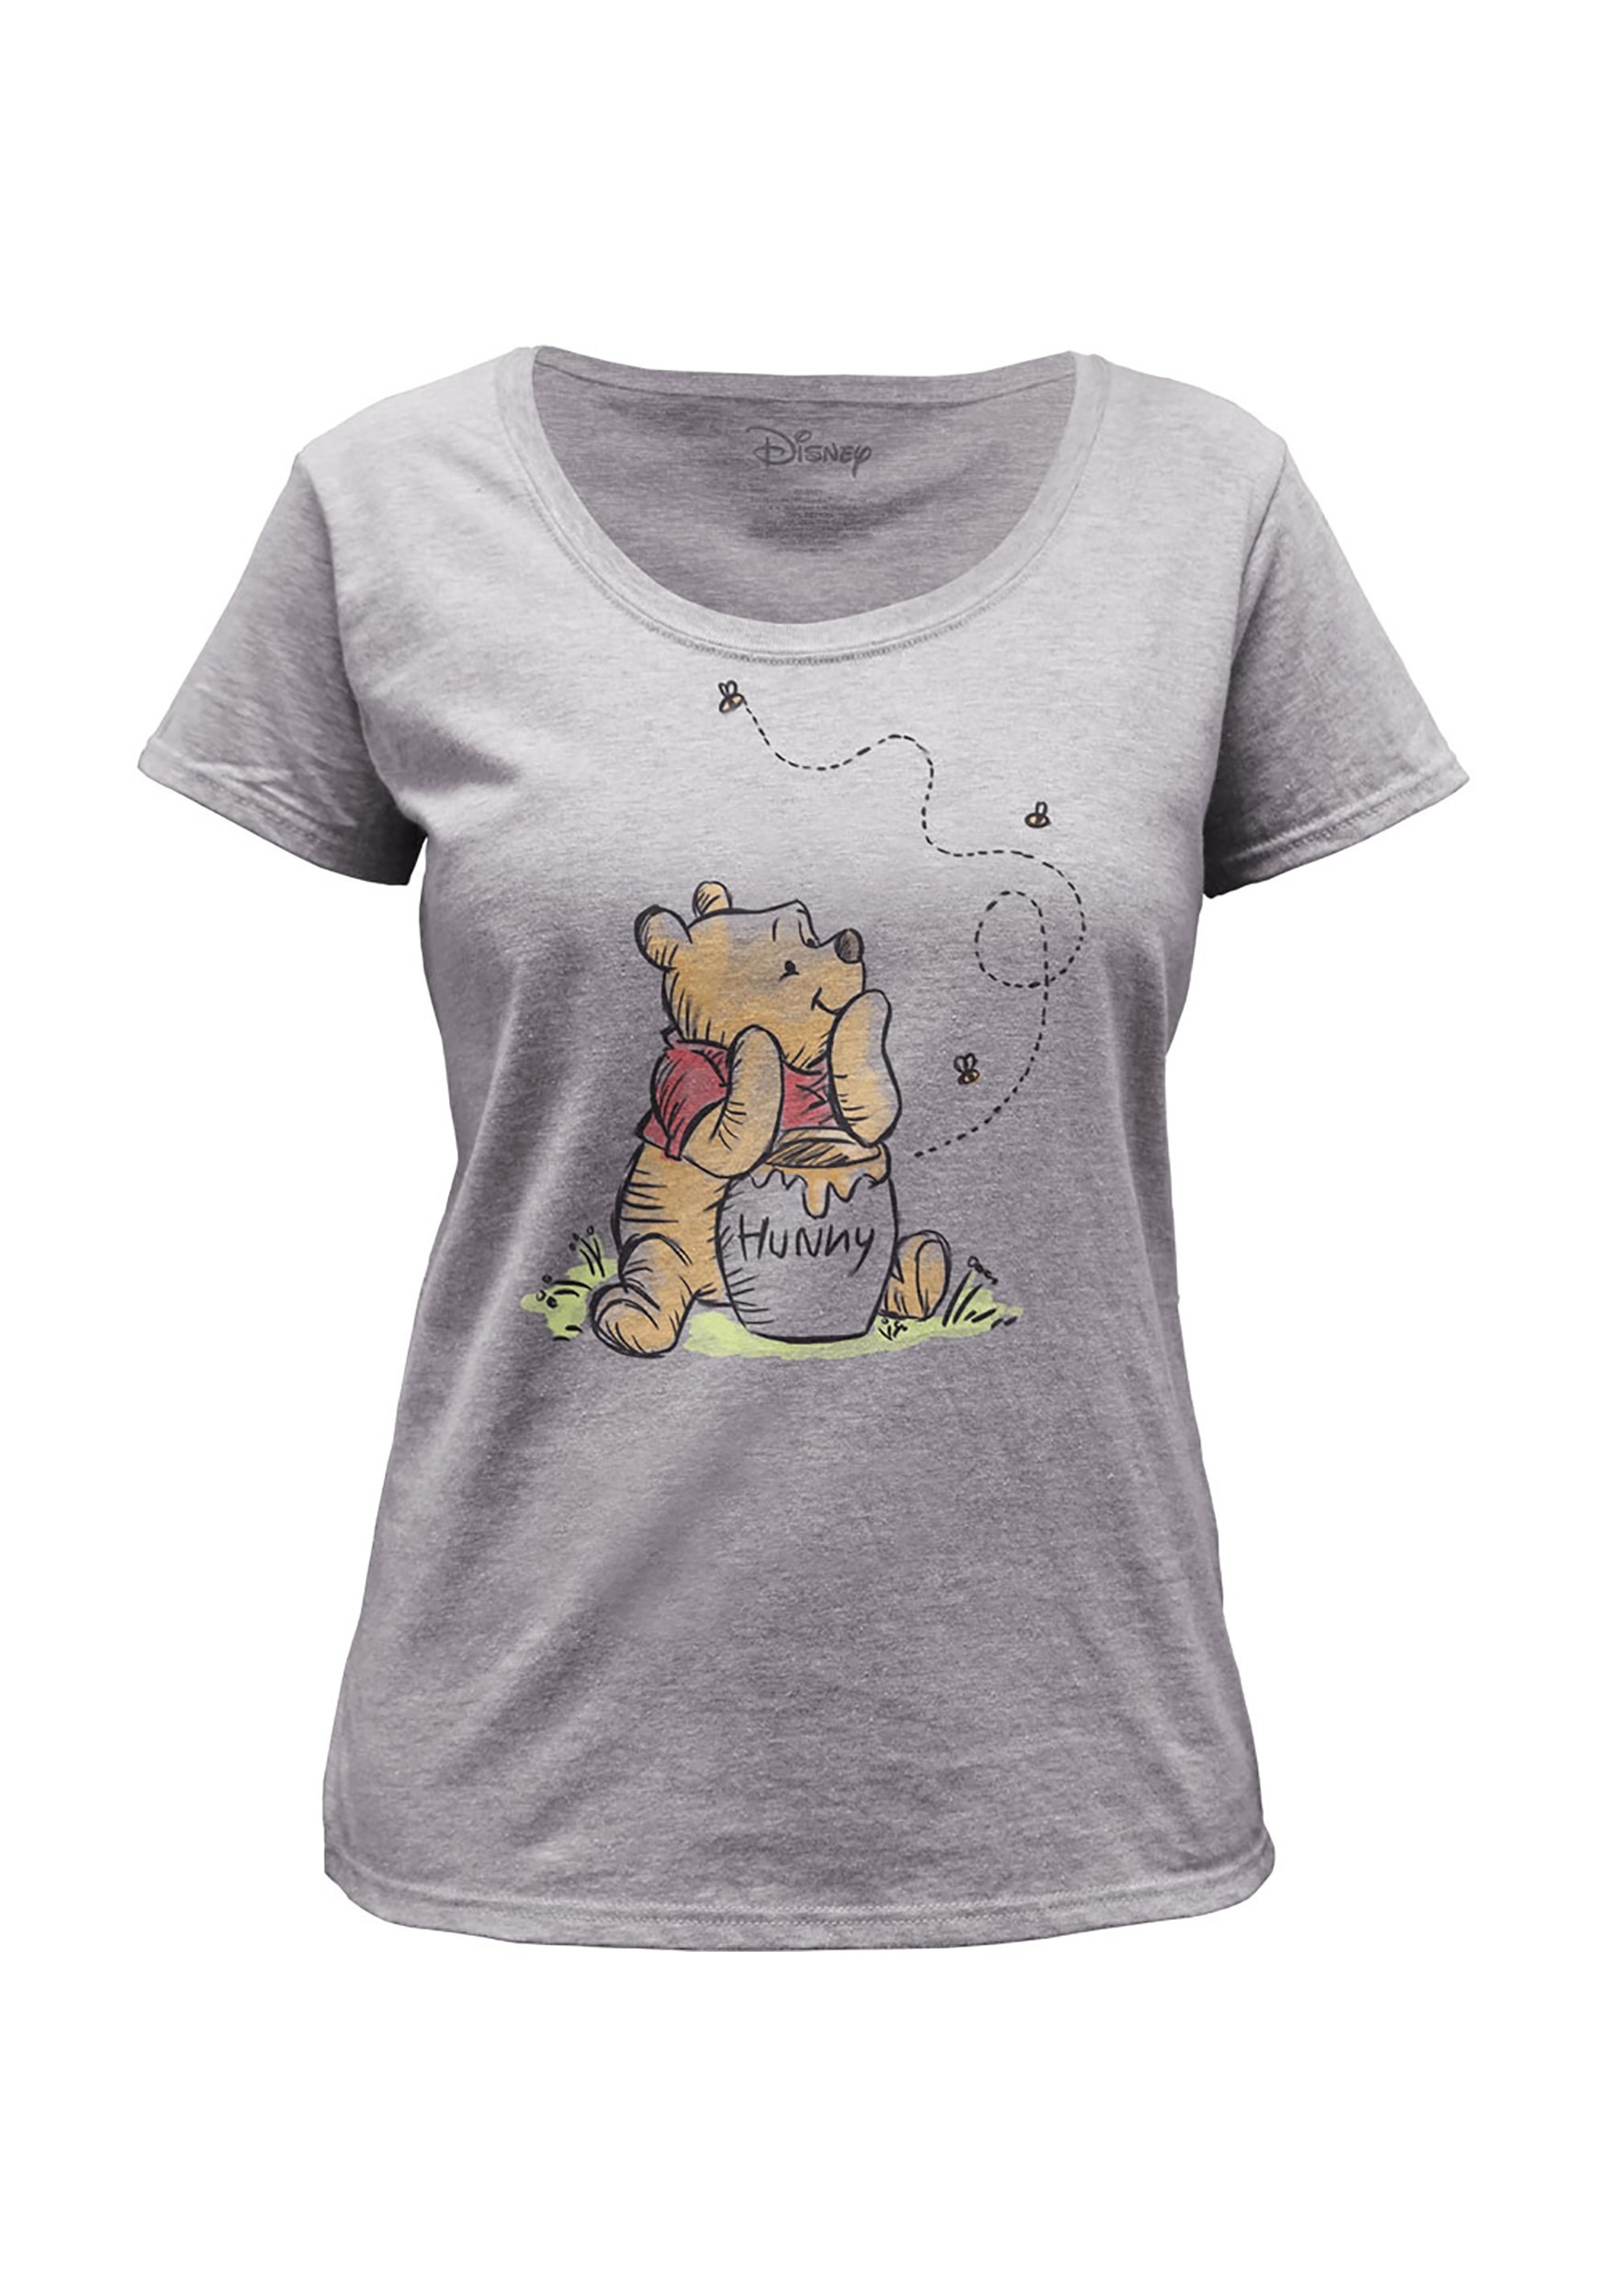 Winnie the Pooh Womens Hunny Bees Scoopneck Tee